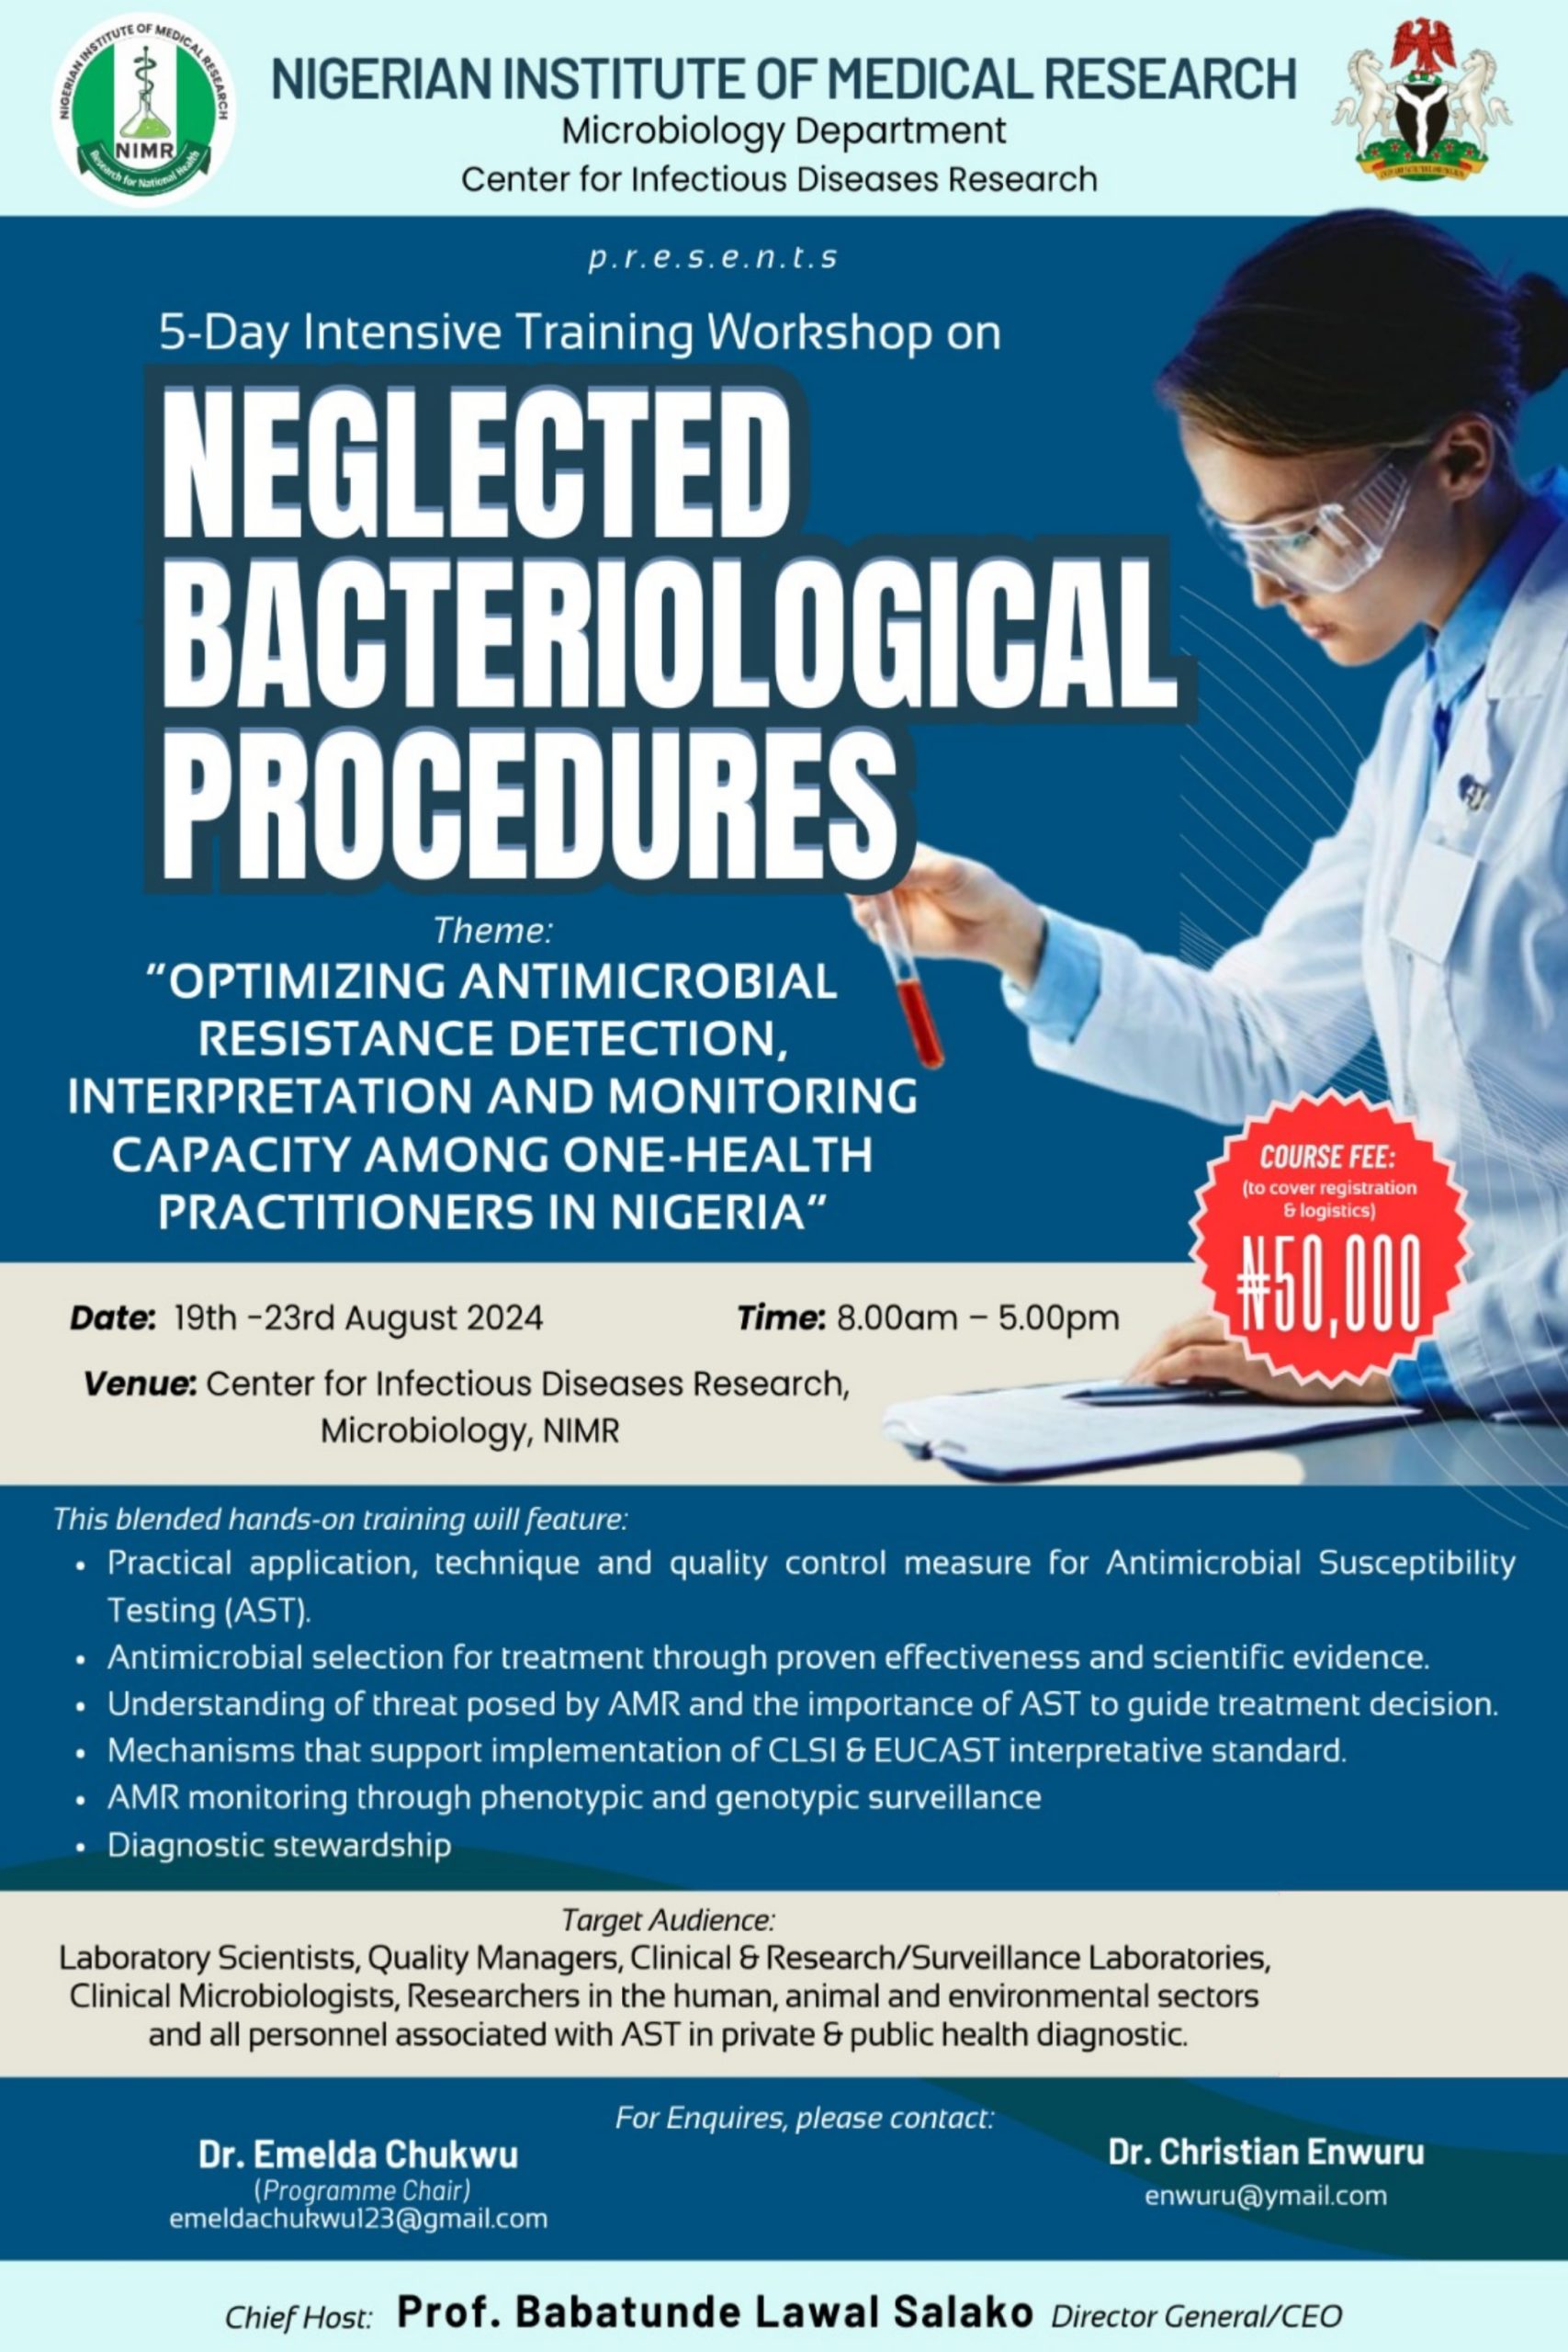 5-Day Intensive Training Workshop on Neglected Bacteriological Procedures